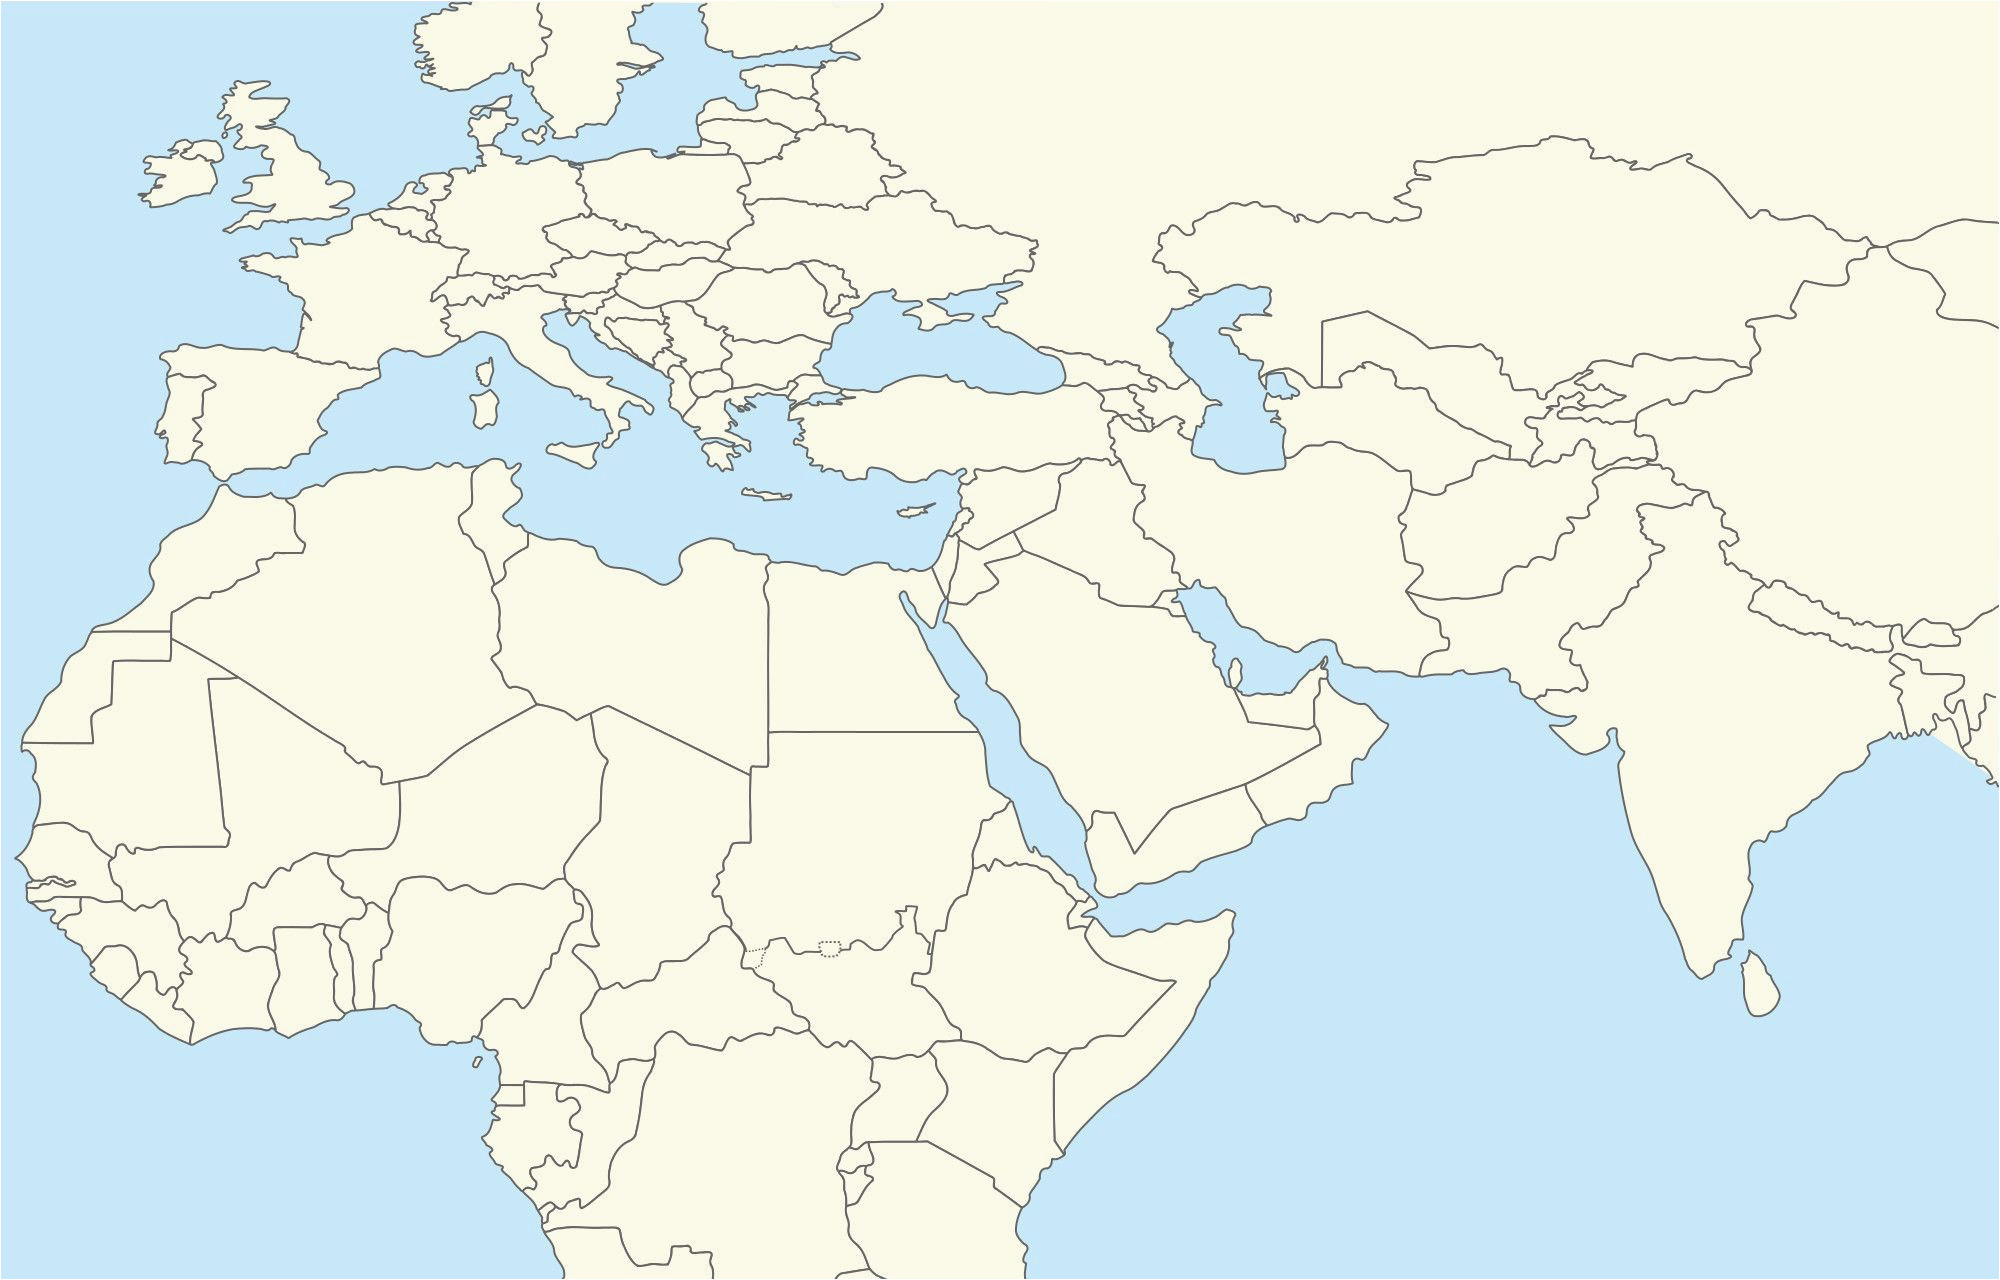 Blank Map Of Europe and Middle East Pin On Art Craft Ideas